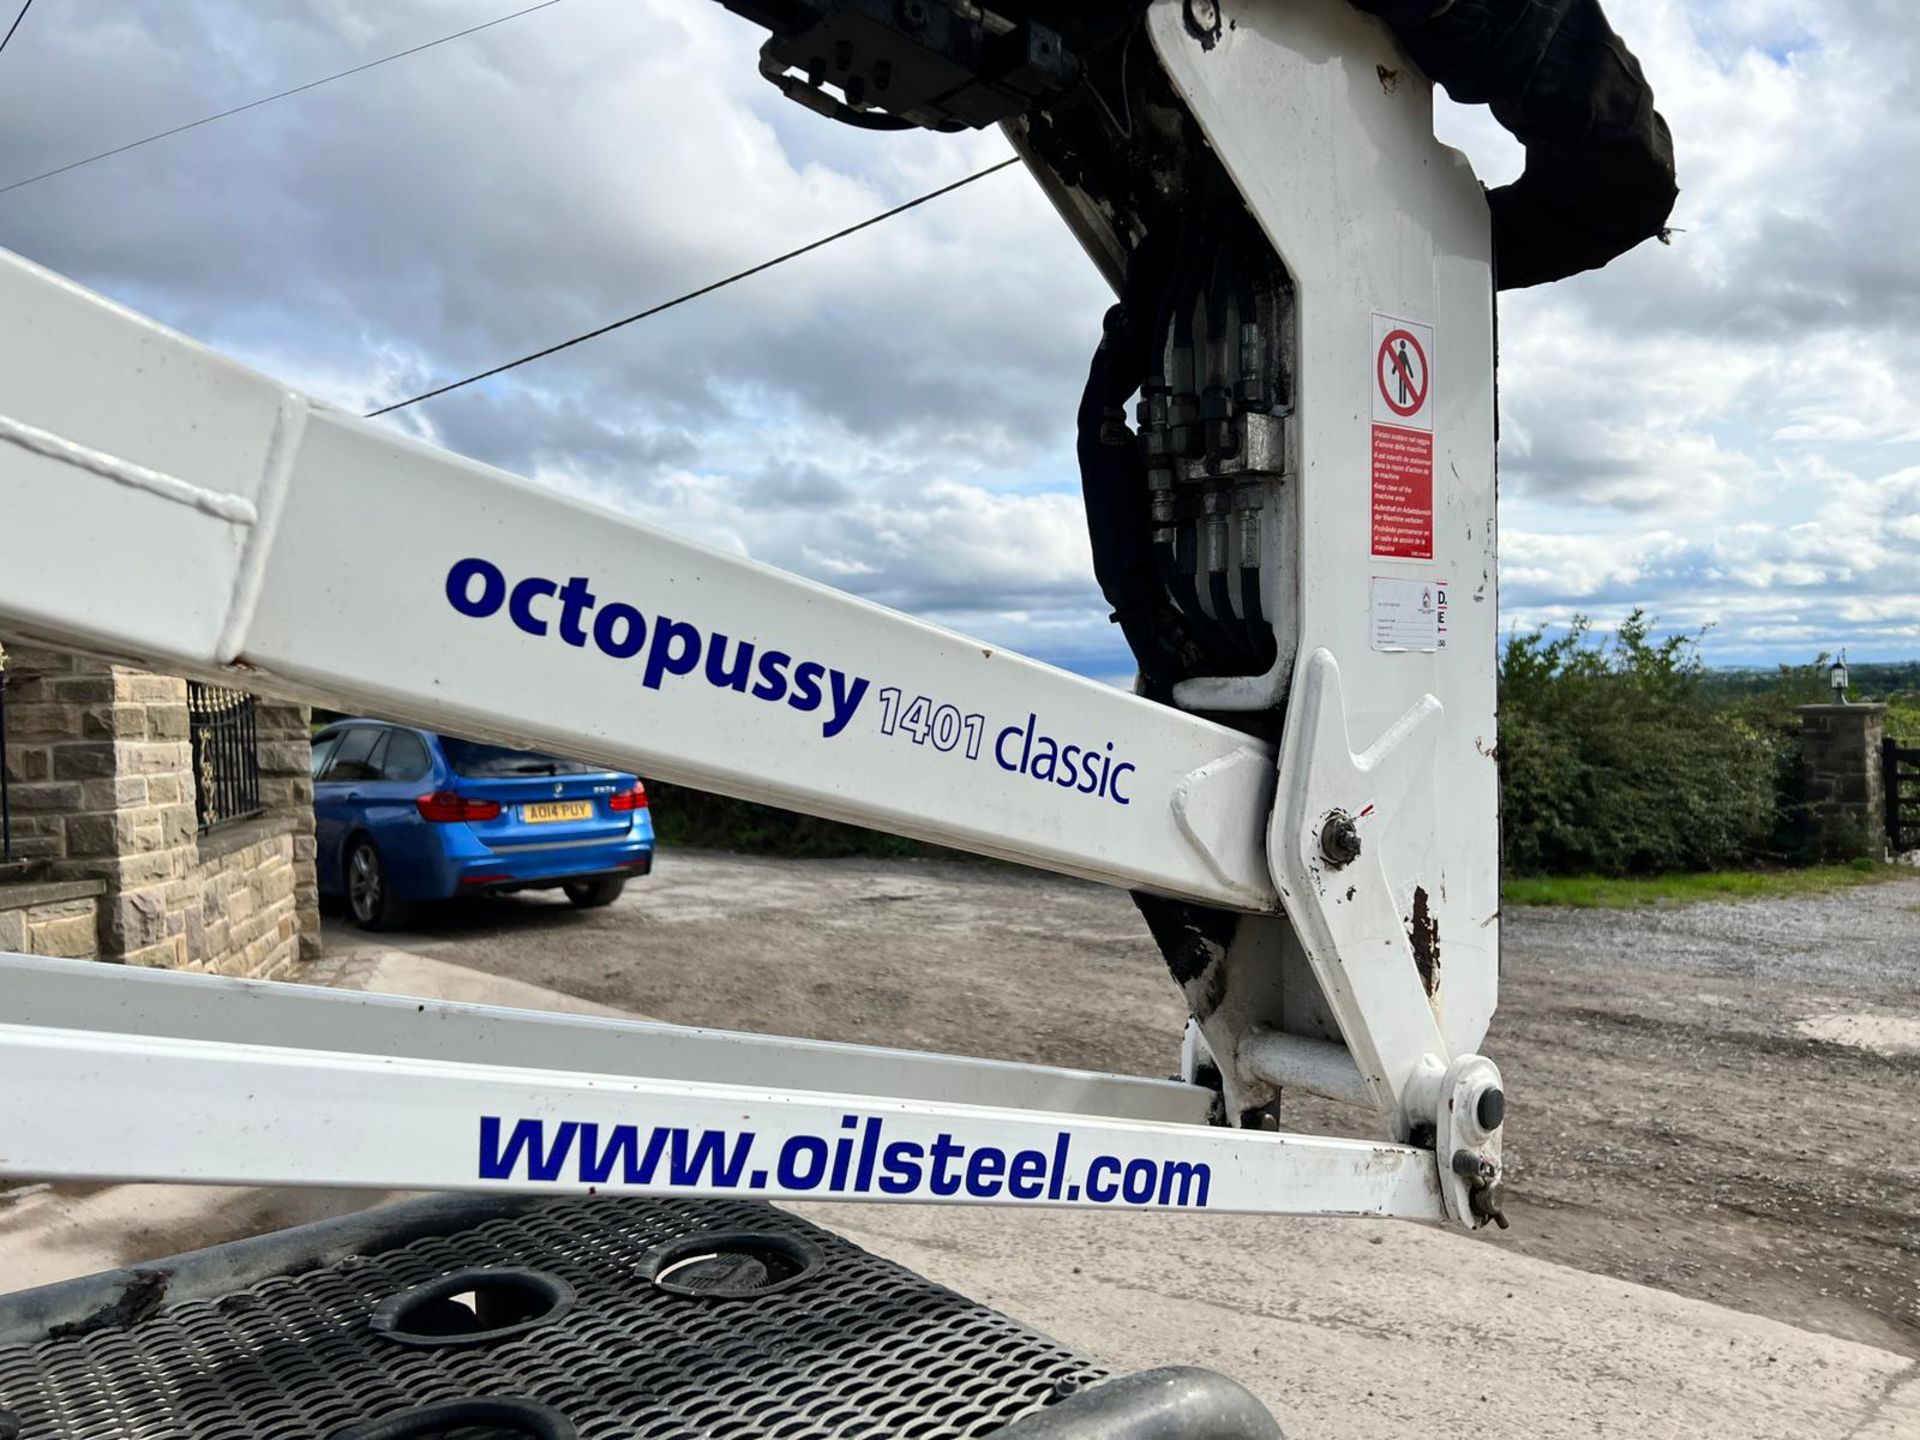 2009 Oil And Steel Octopussy 1401 Classic Spider Boom Lift *PLUS VAT* - Image 13 of 23